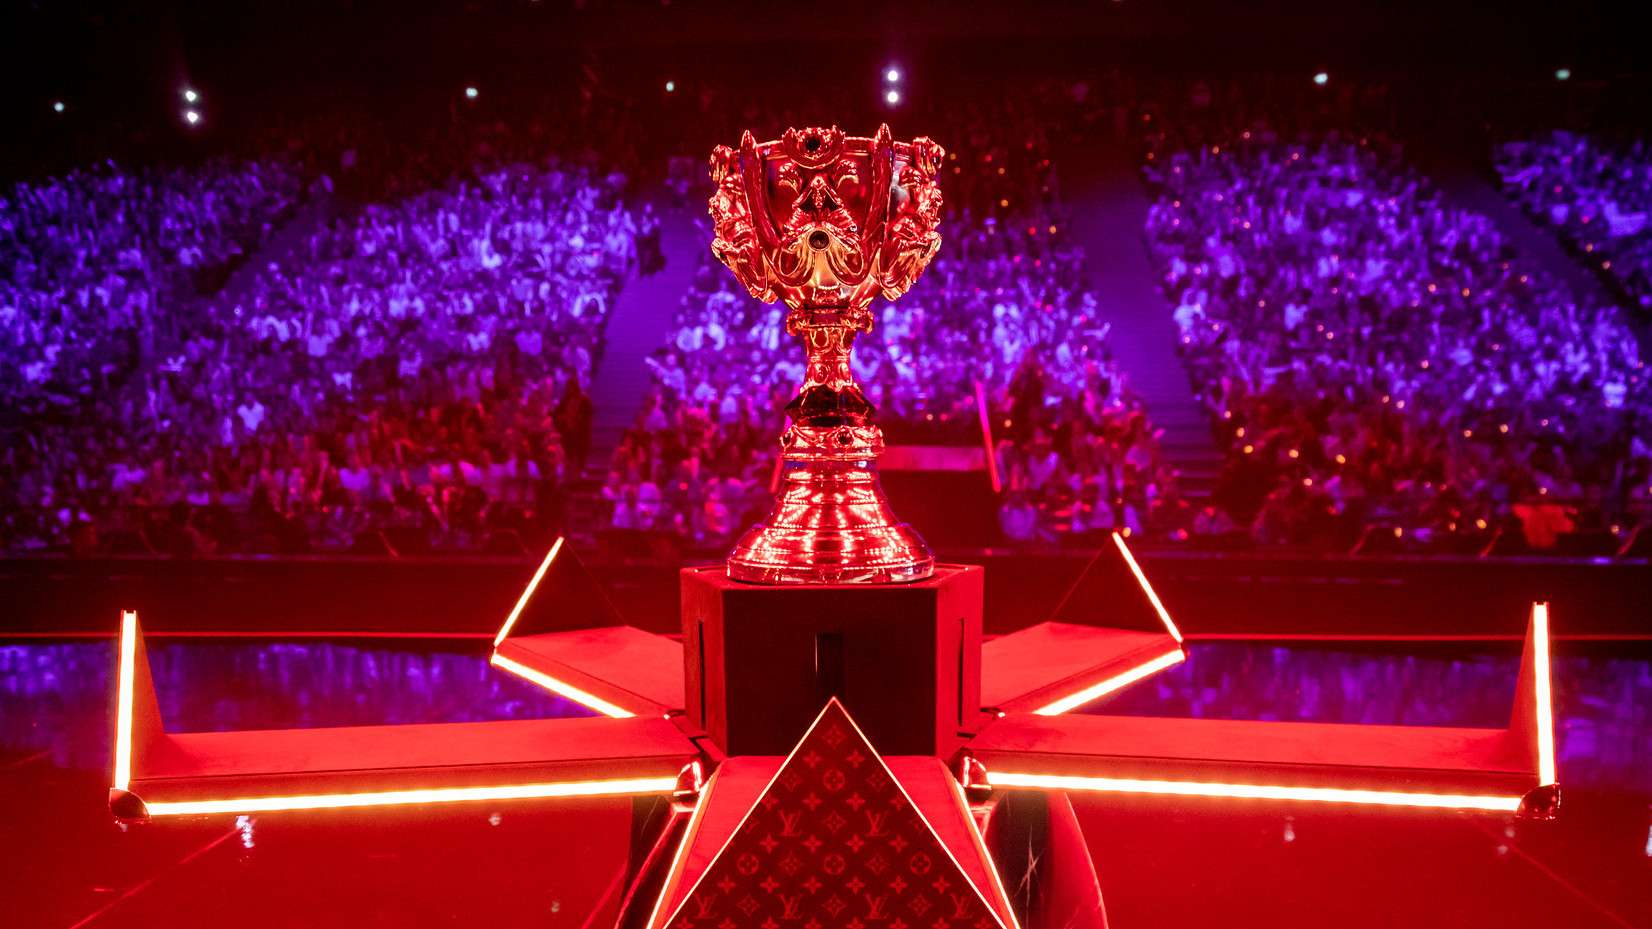 Summoners Cup in League of Legends